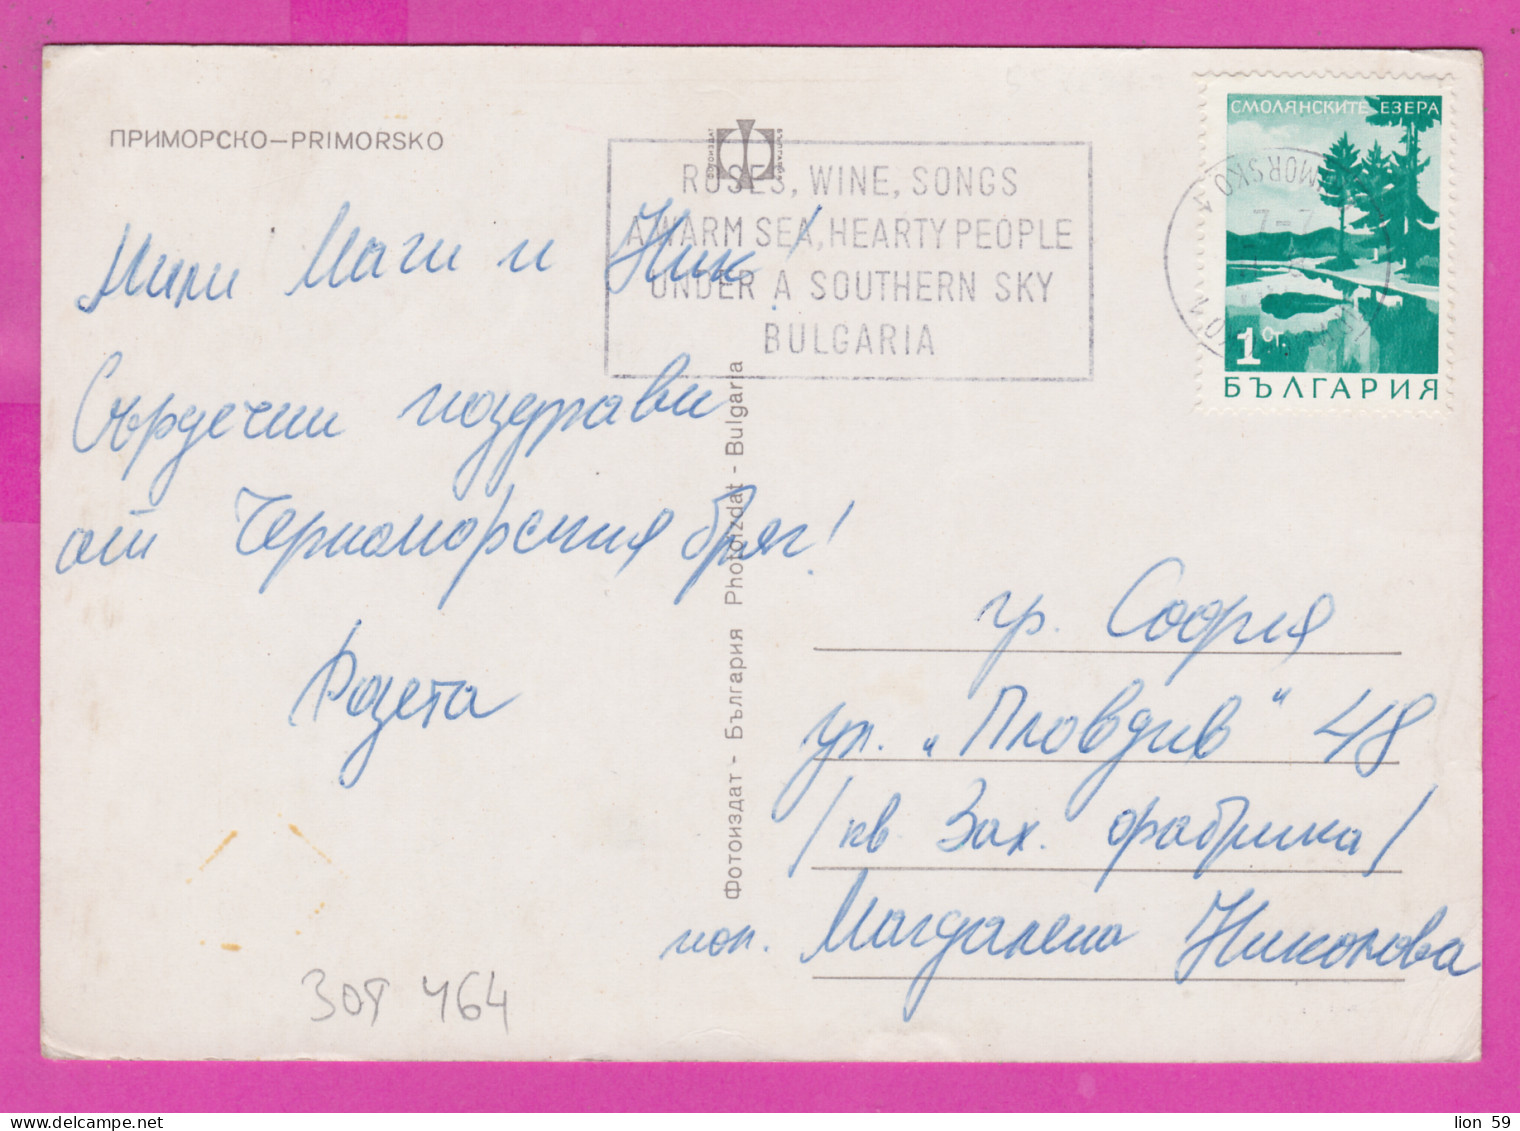 309464 / Primorsko - Camping "Perla" PC USED  Roses Wine, Songs, Aearm Sea,Hearty People Under A Southern Sky Bulgaria - Lettres & Documents